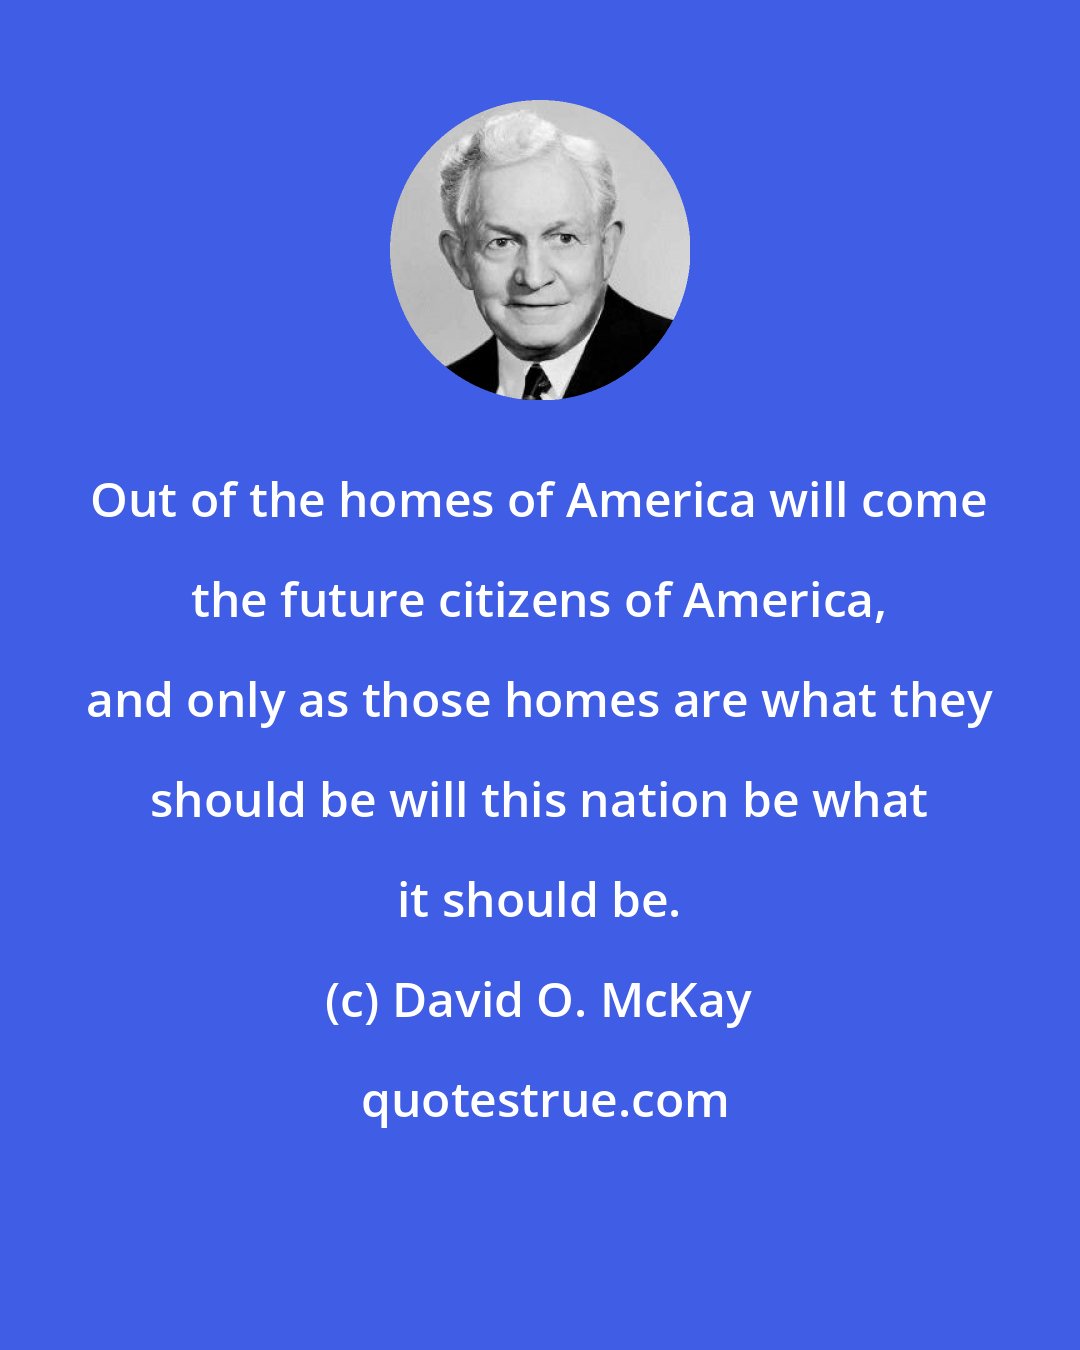 David O. McKay: Out of the homes of America will come the future citizens of America, and only as those homes are what they should be will this nation be what it should be.